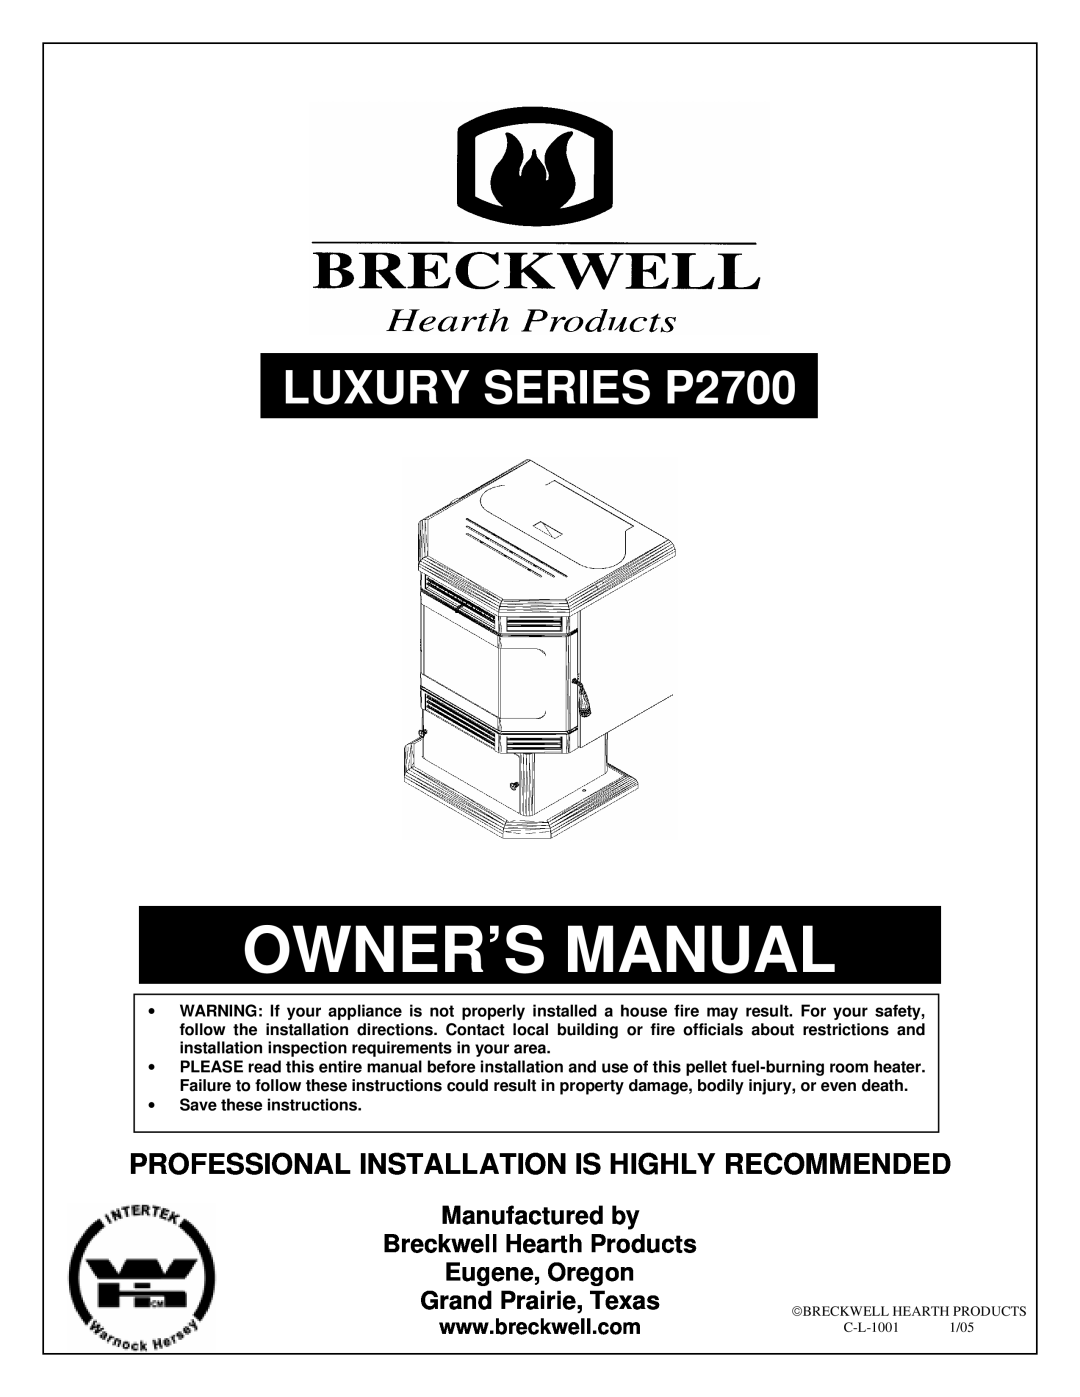 Breckwell owner manual LUXURY SERIES P2700, Professional Installation Is Highly Recommended 